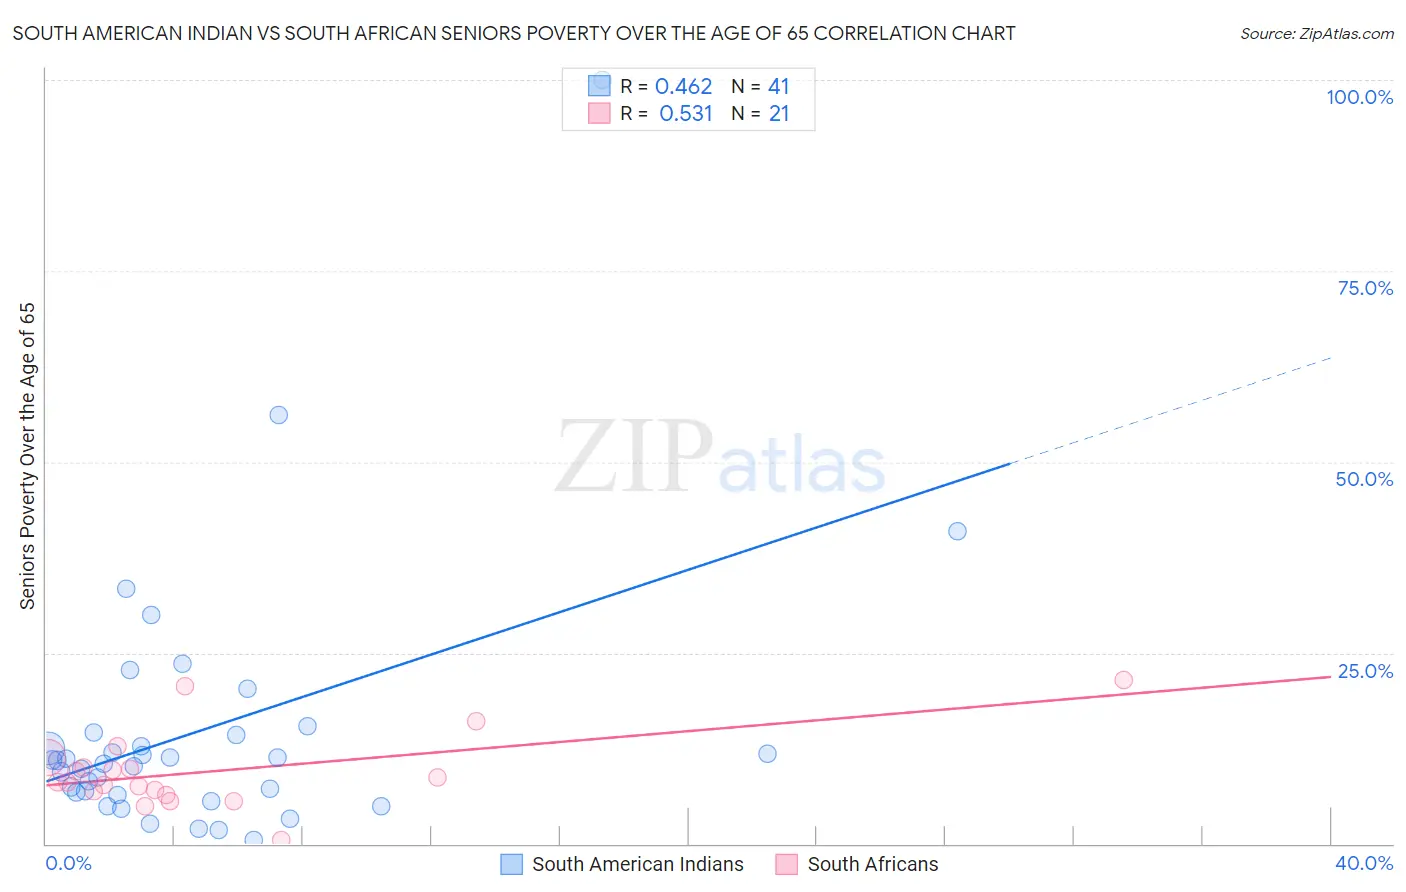 South American Indian vs South African Seniors Poverty Over the Age of 65